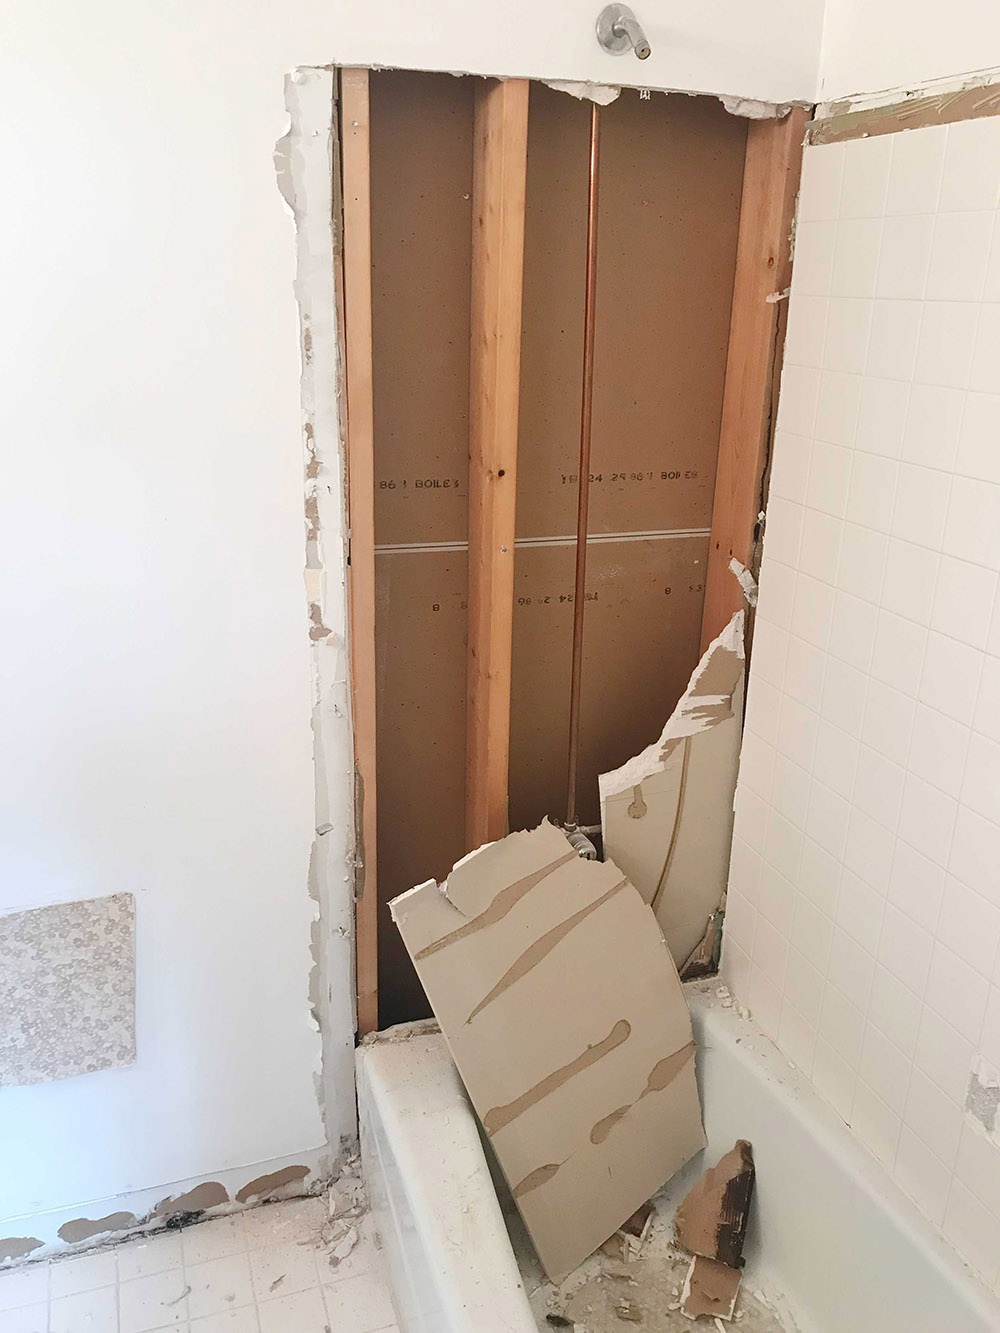 A shower wall is demolished exposing pipes.